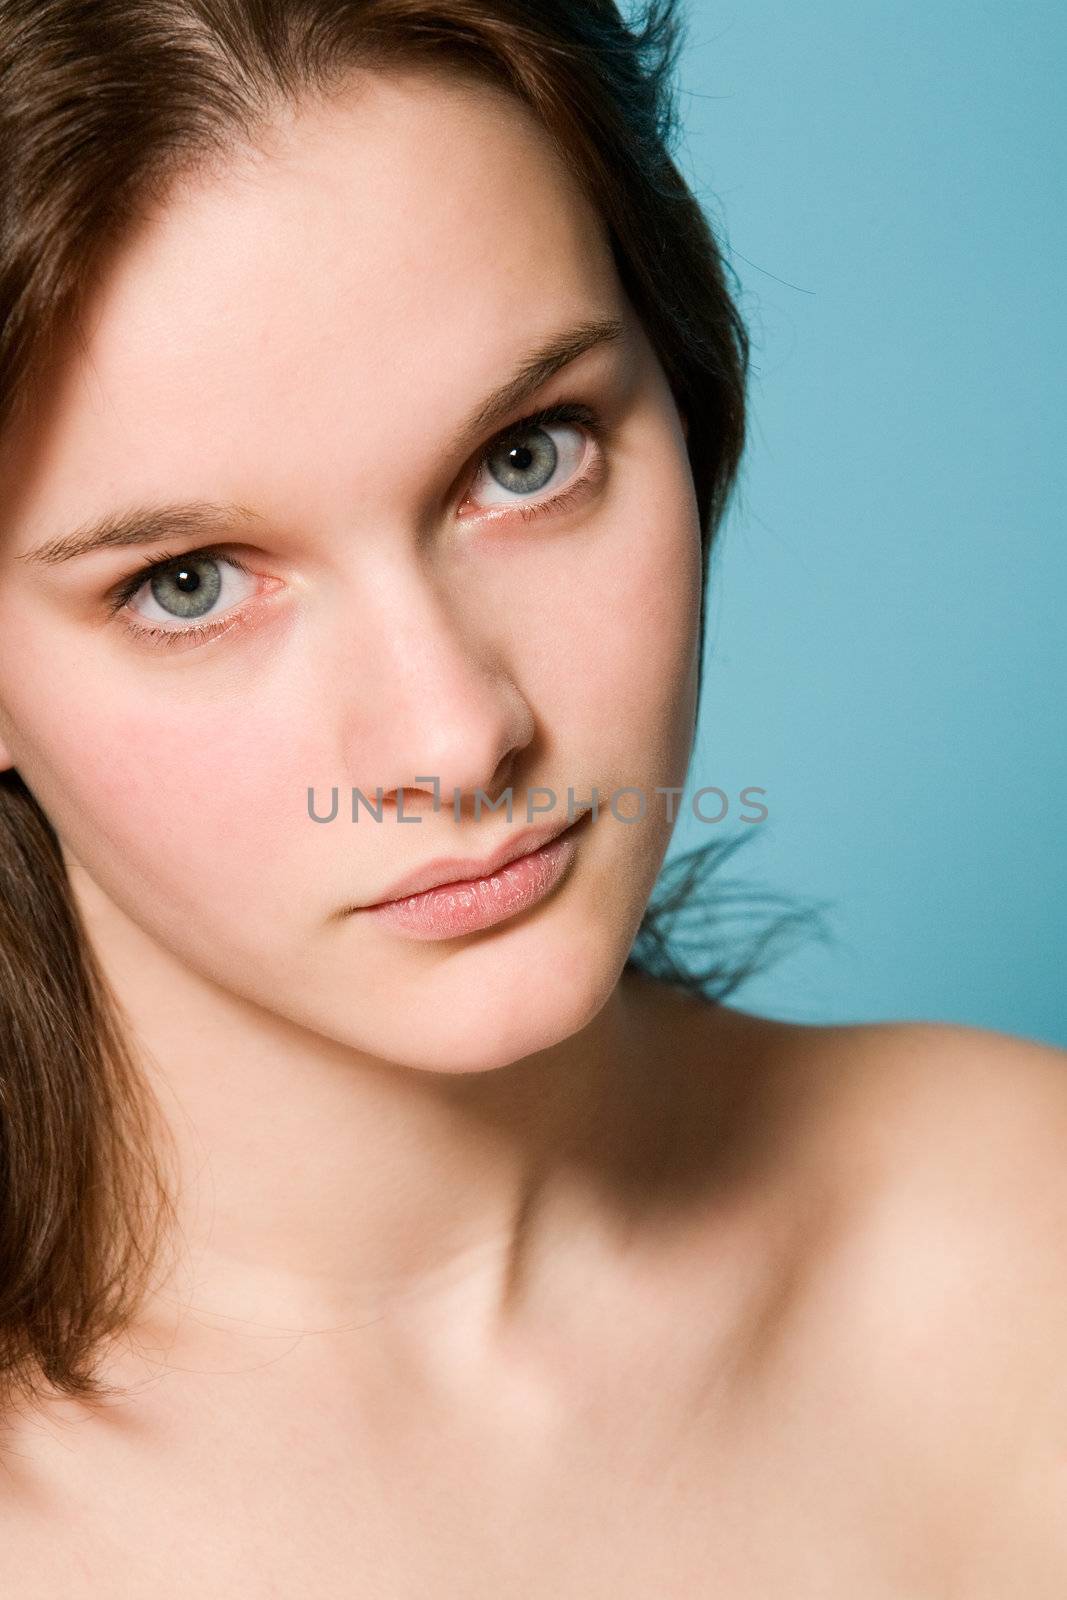 Natural portrait of a girl with short brown hair